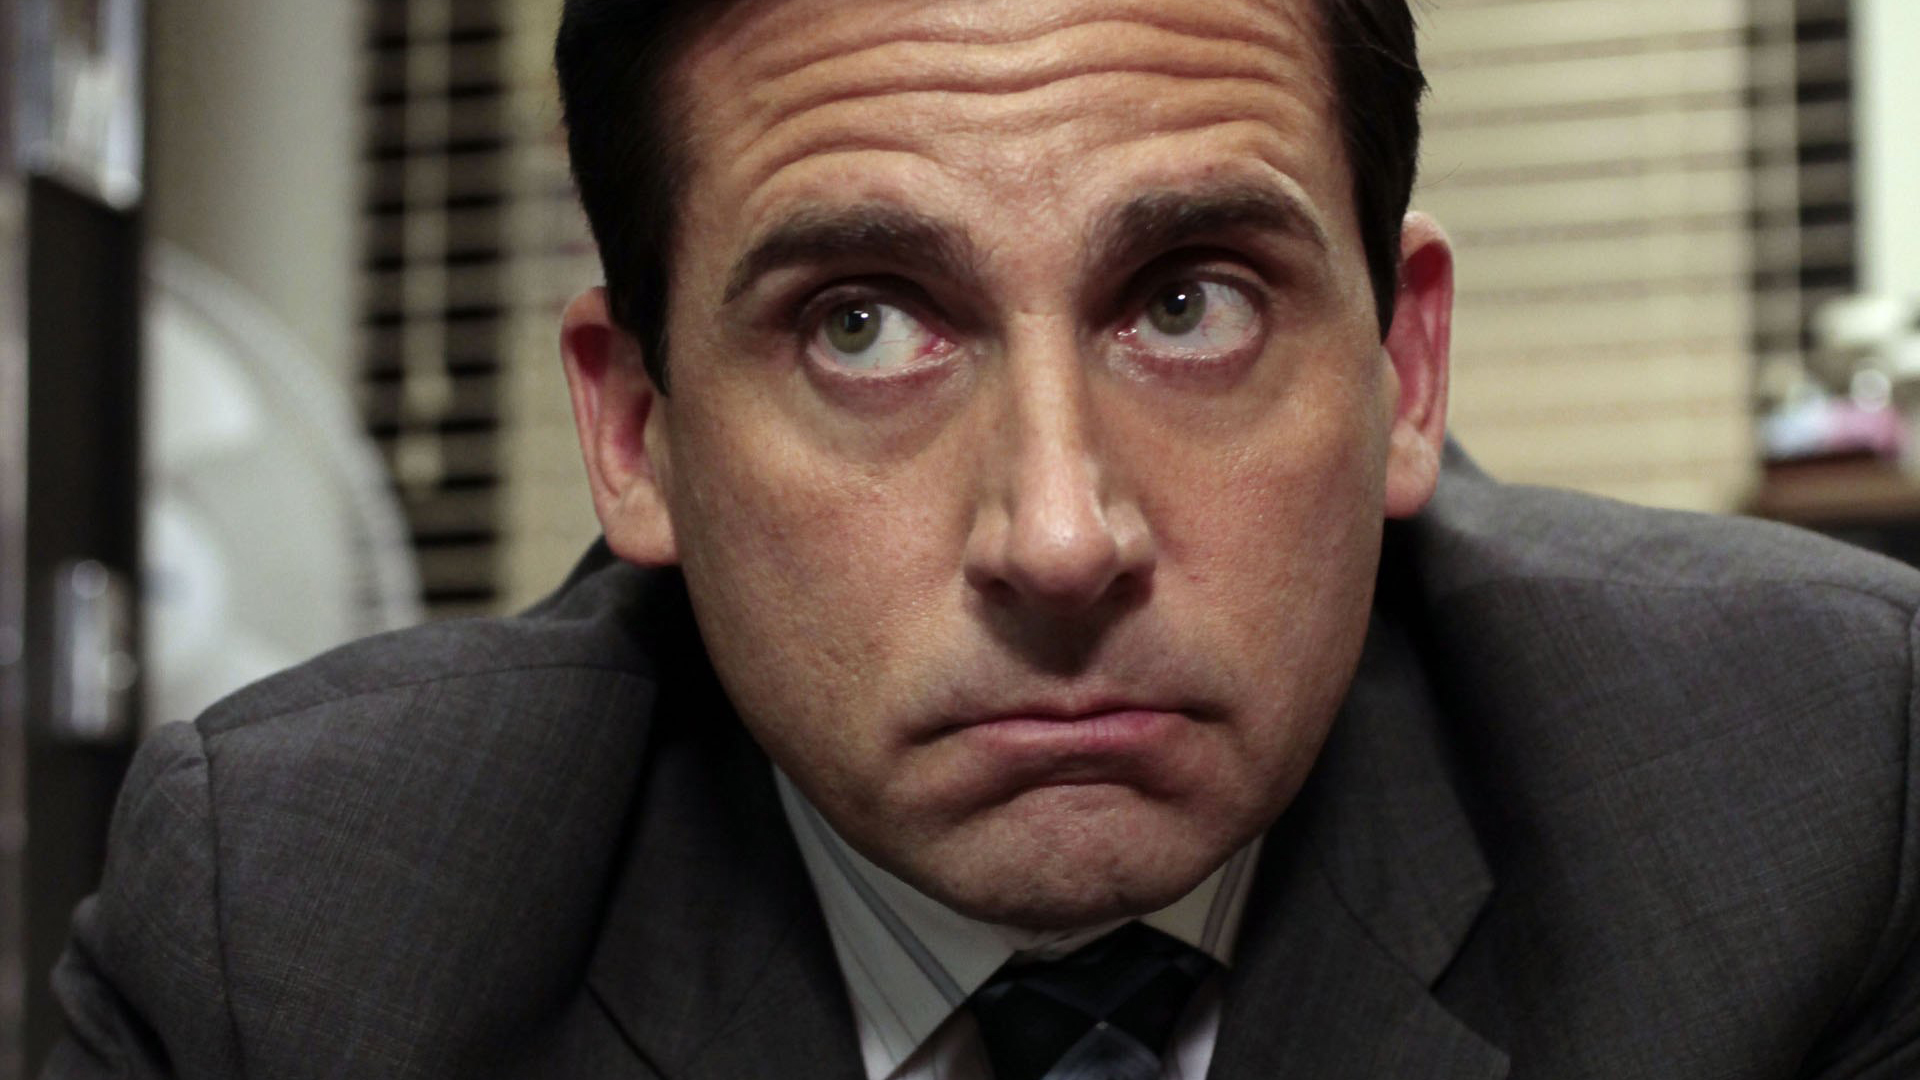 Why ‘The Office’ Fans Shouldn’t Expect a Reboot Anytime Soon